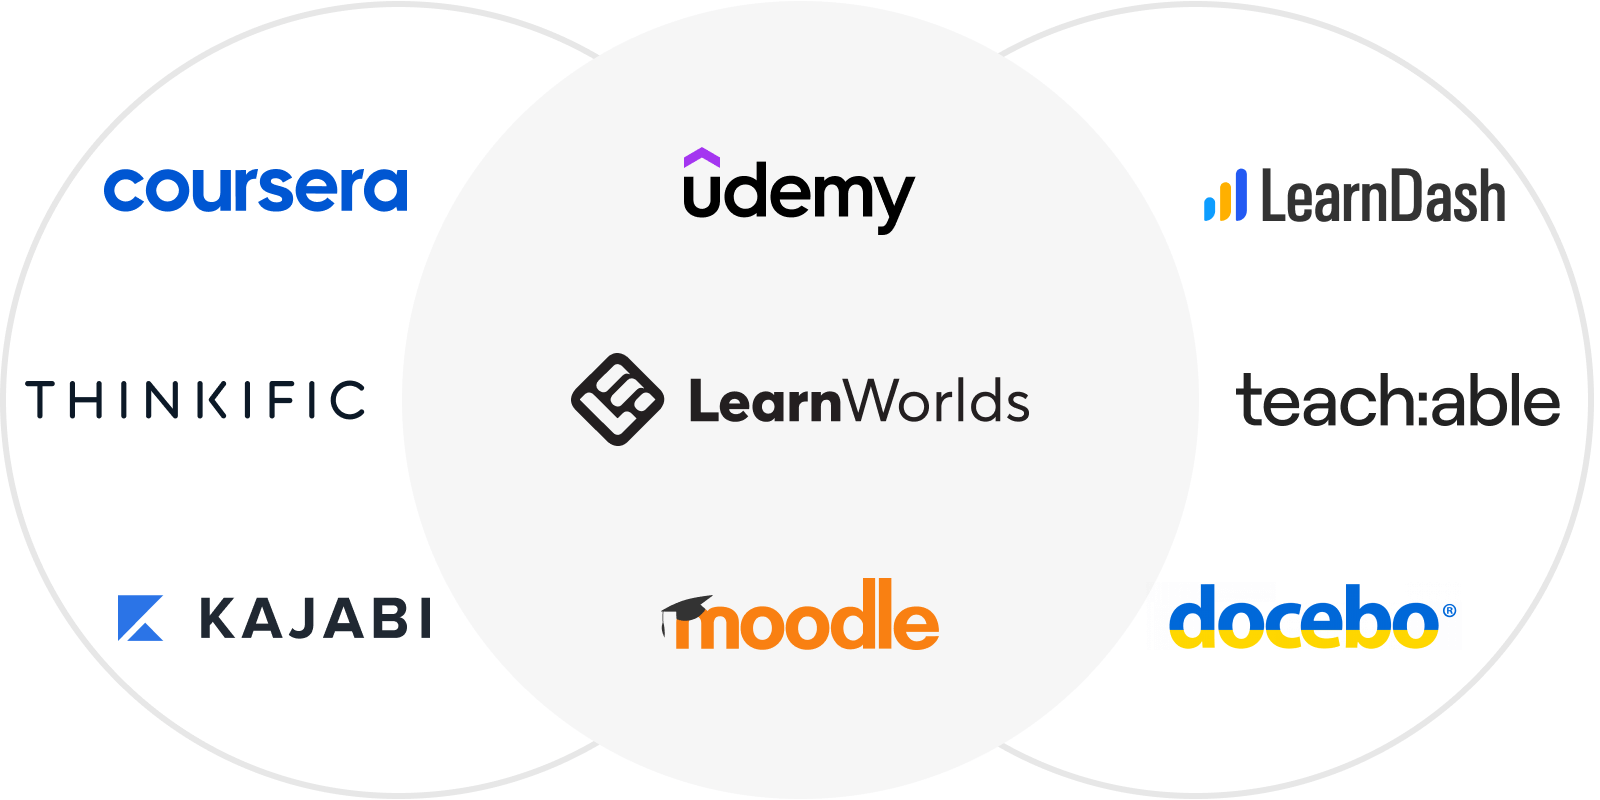 These are the best online learning platforms: LearnWorlds, Coursera, Uedemy, Kajabi, Moodle, Docebo, Thinkific, Teachable, LearnDash.